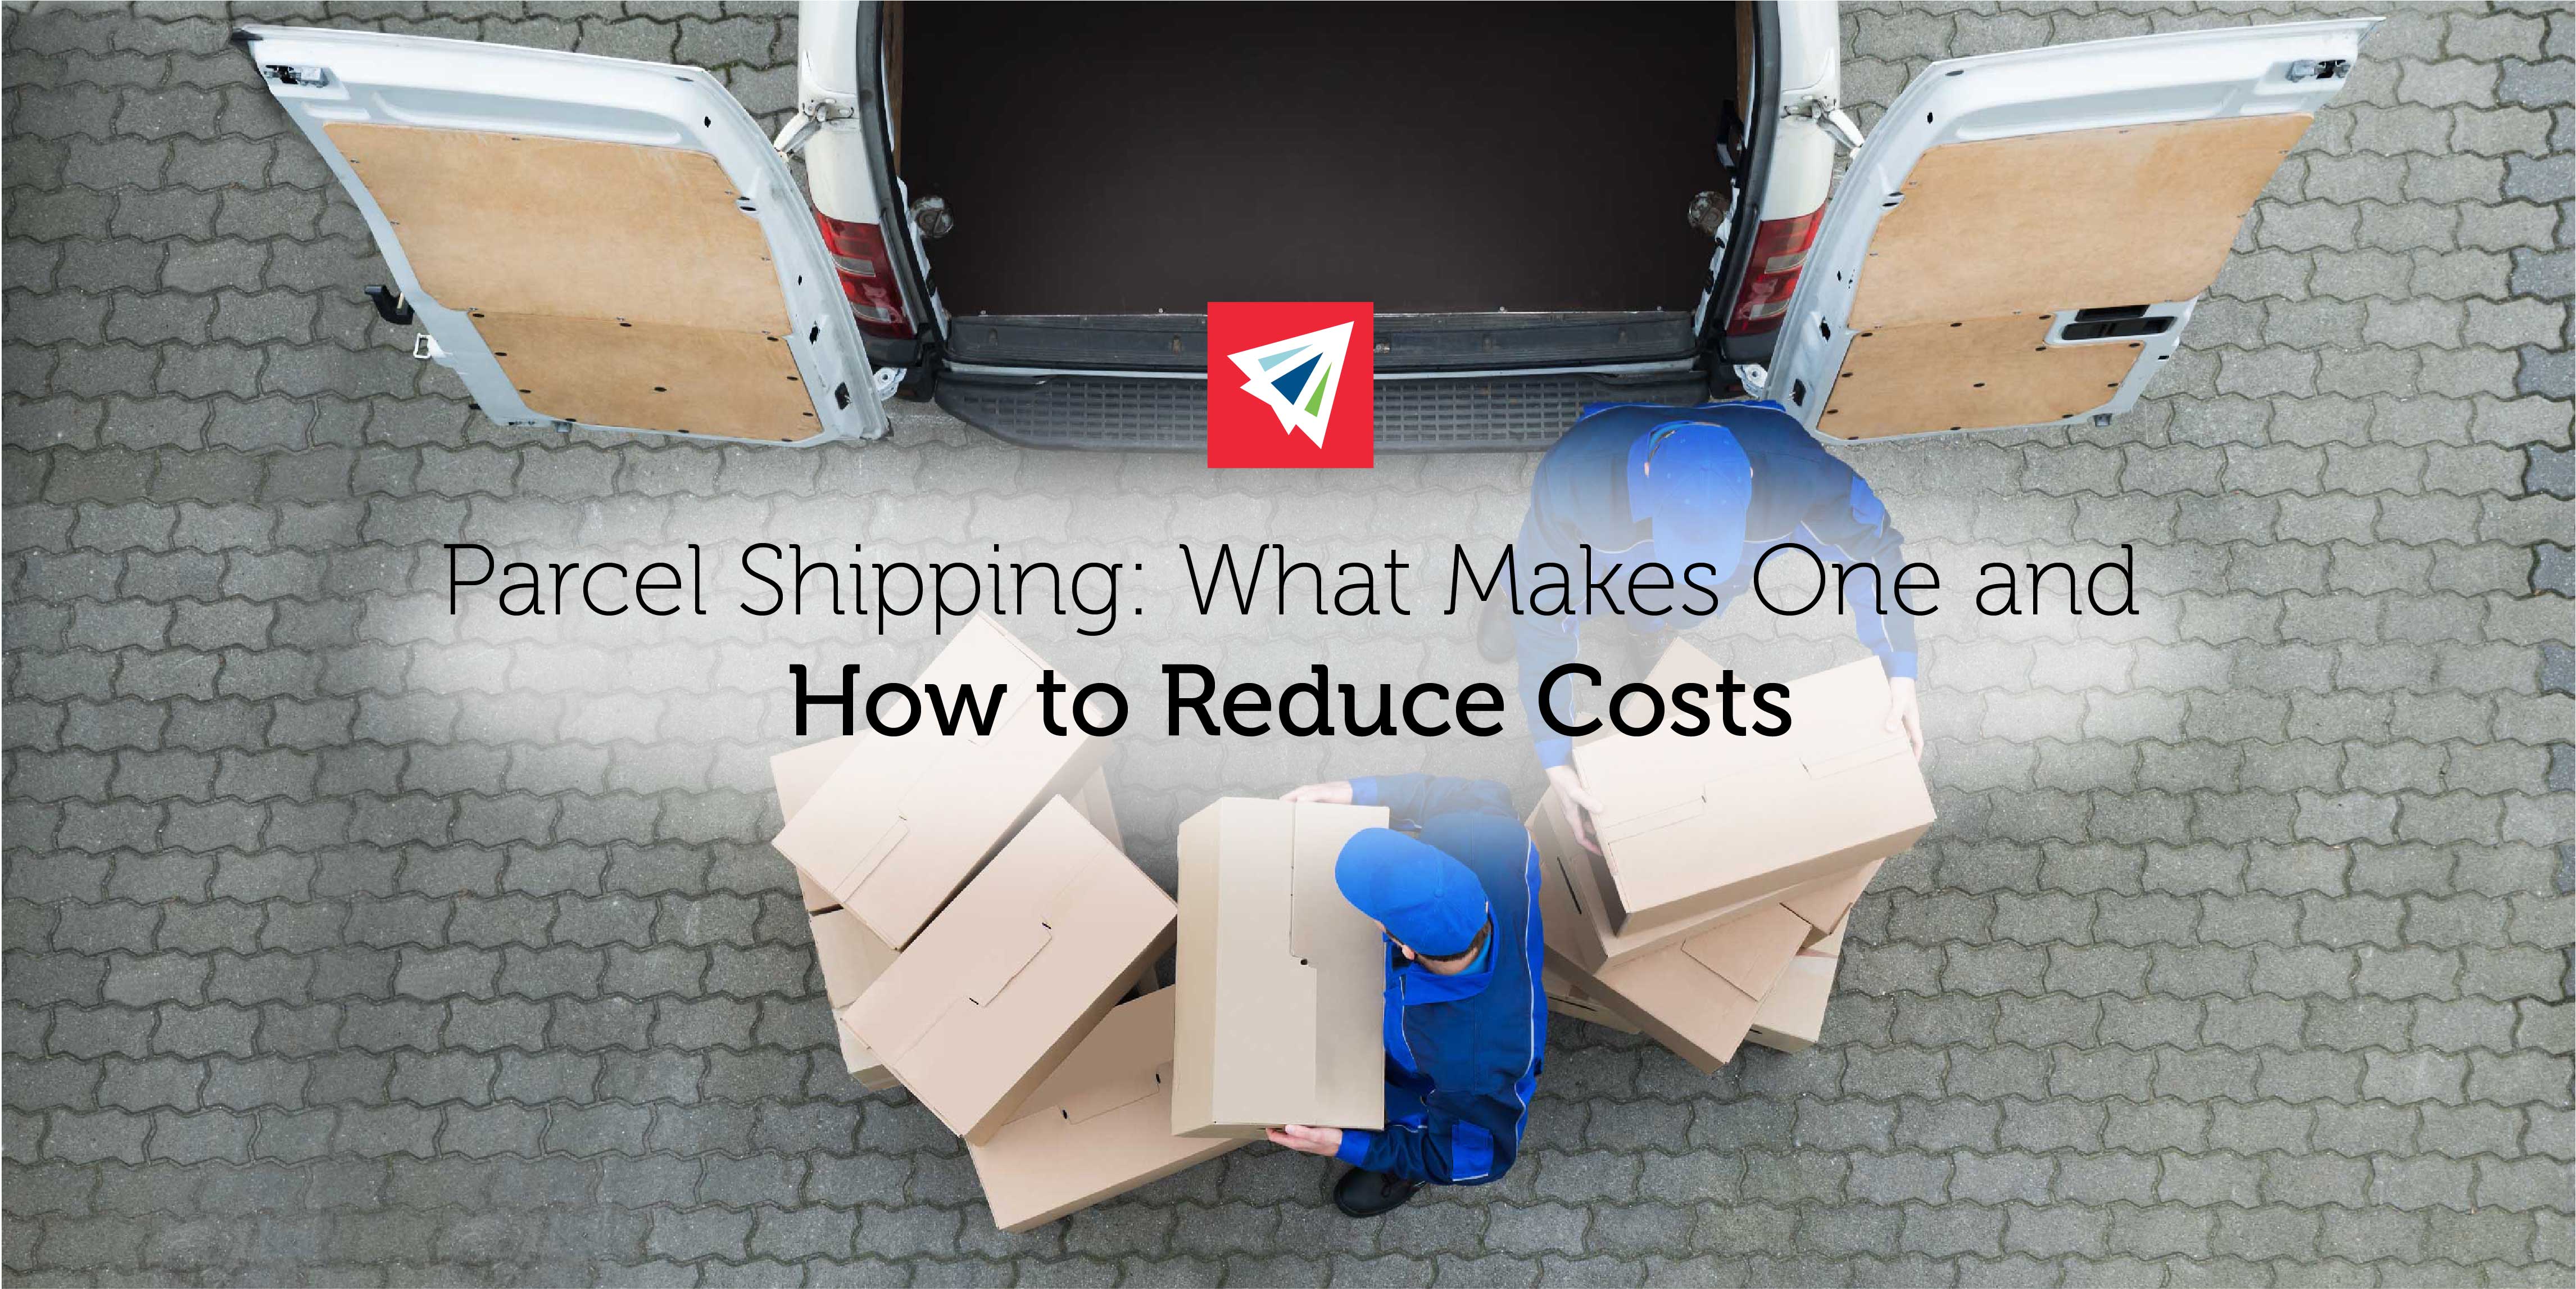 Parcel Shipping - What Makes One and How to Reduce Costs